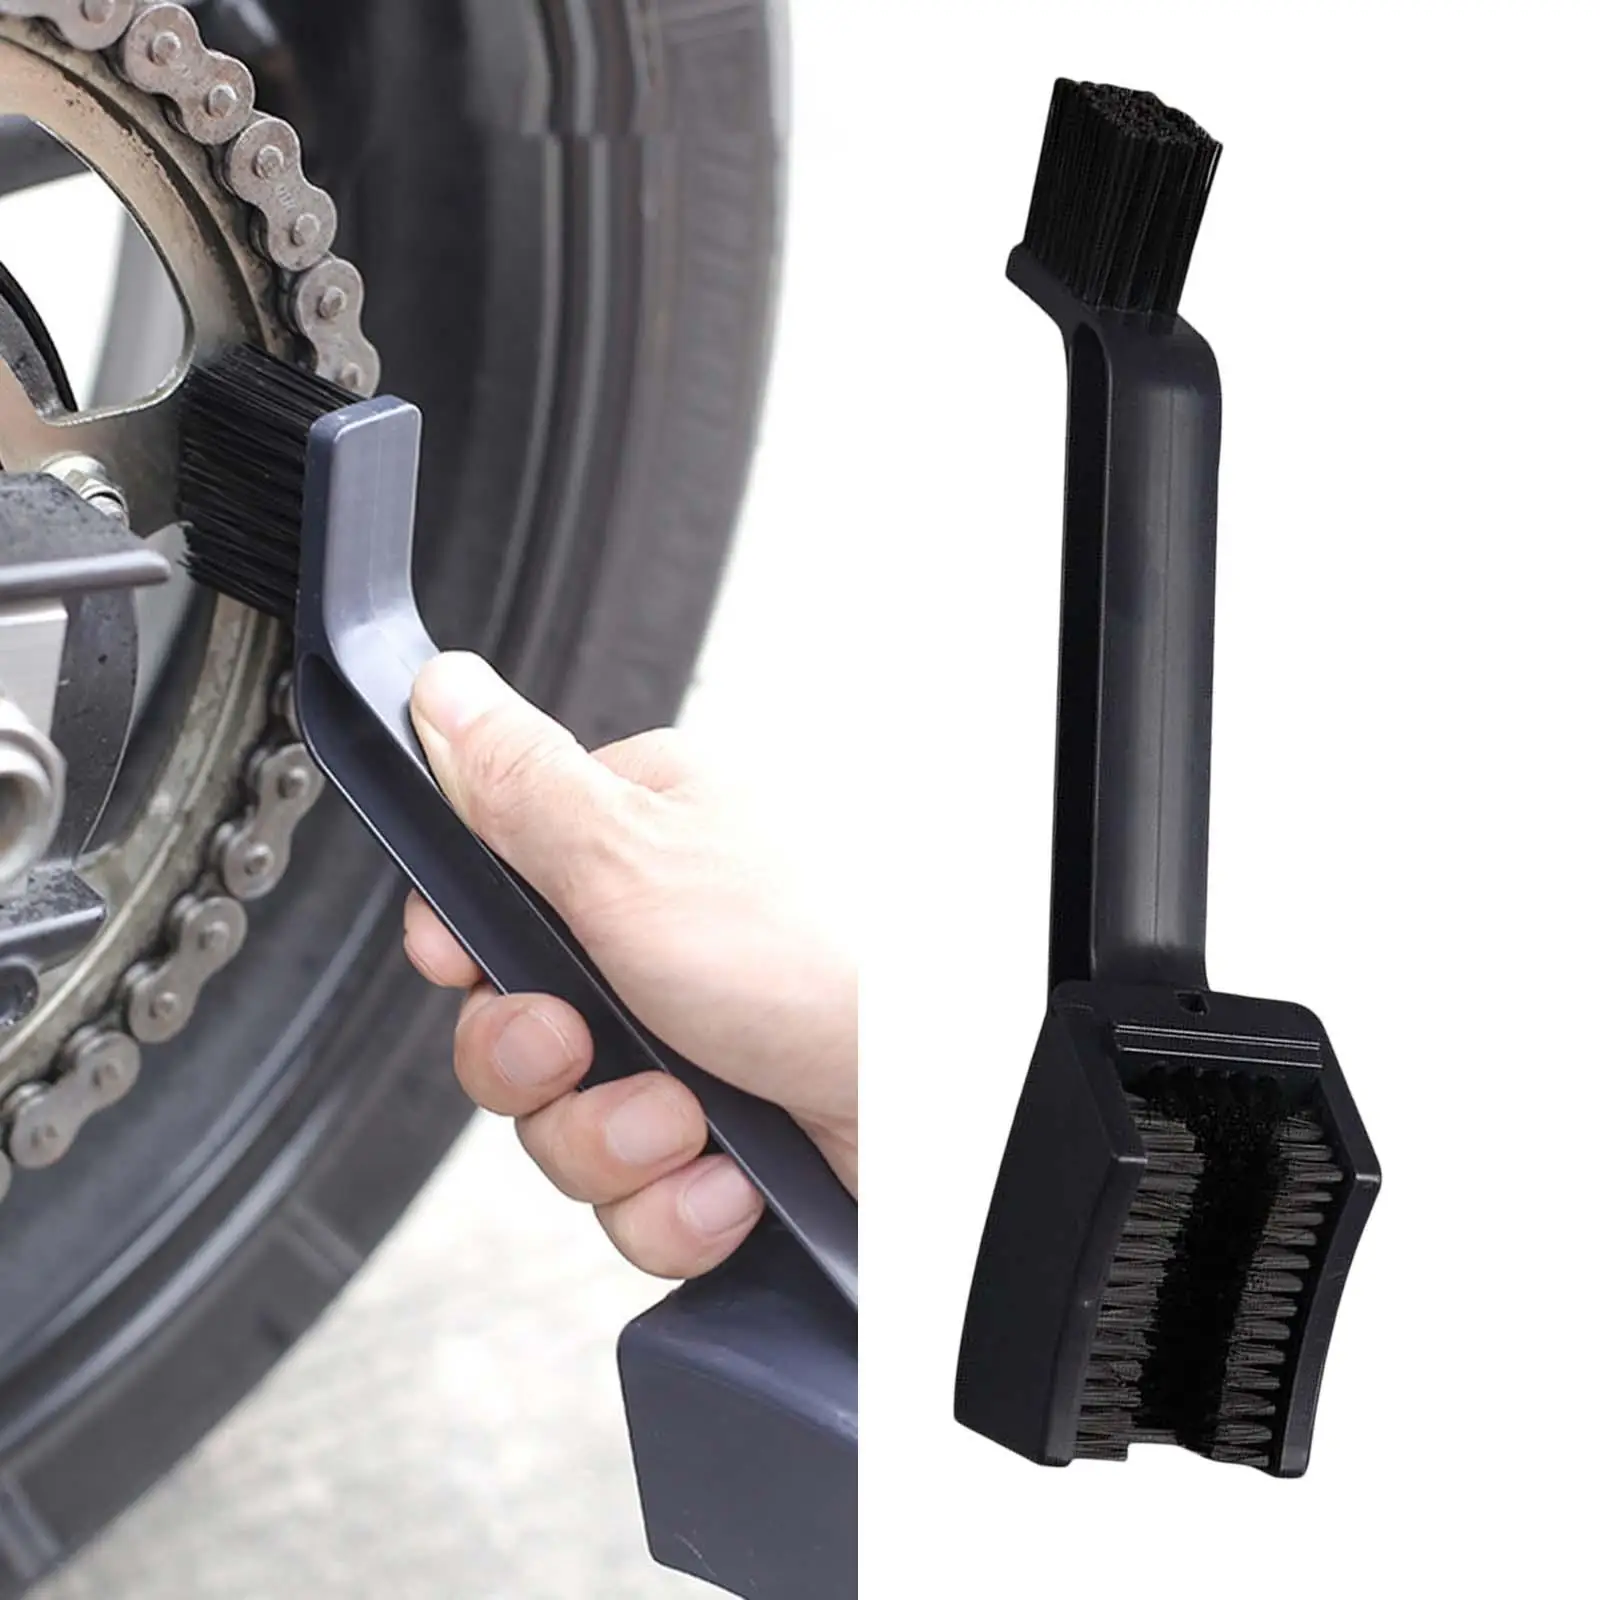 Motorcycle Bike Chain Cleaner Plastic Dual Heads Durable Cleaning Brush Kit Bicycle Chain Scrubber